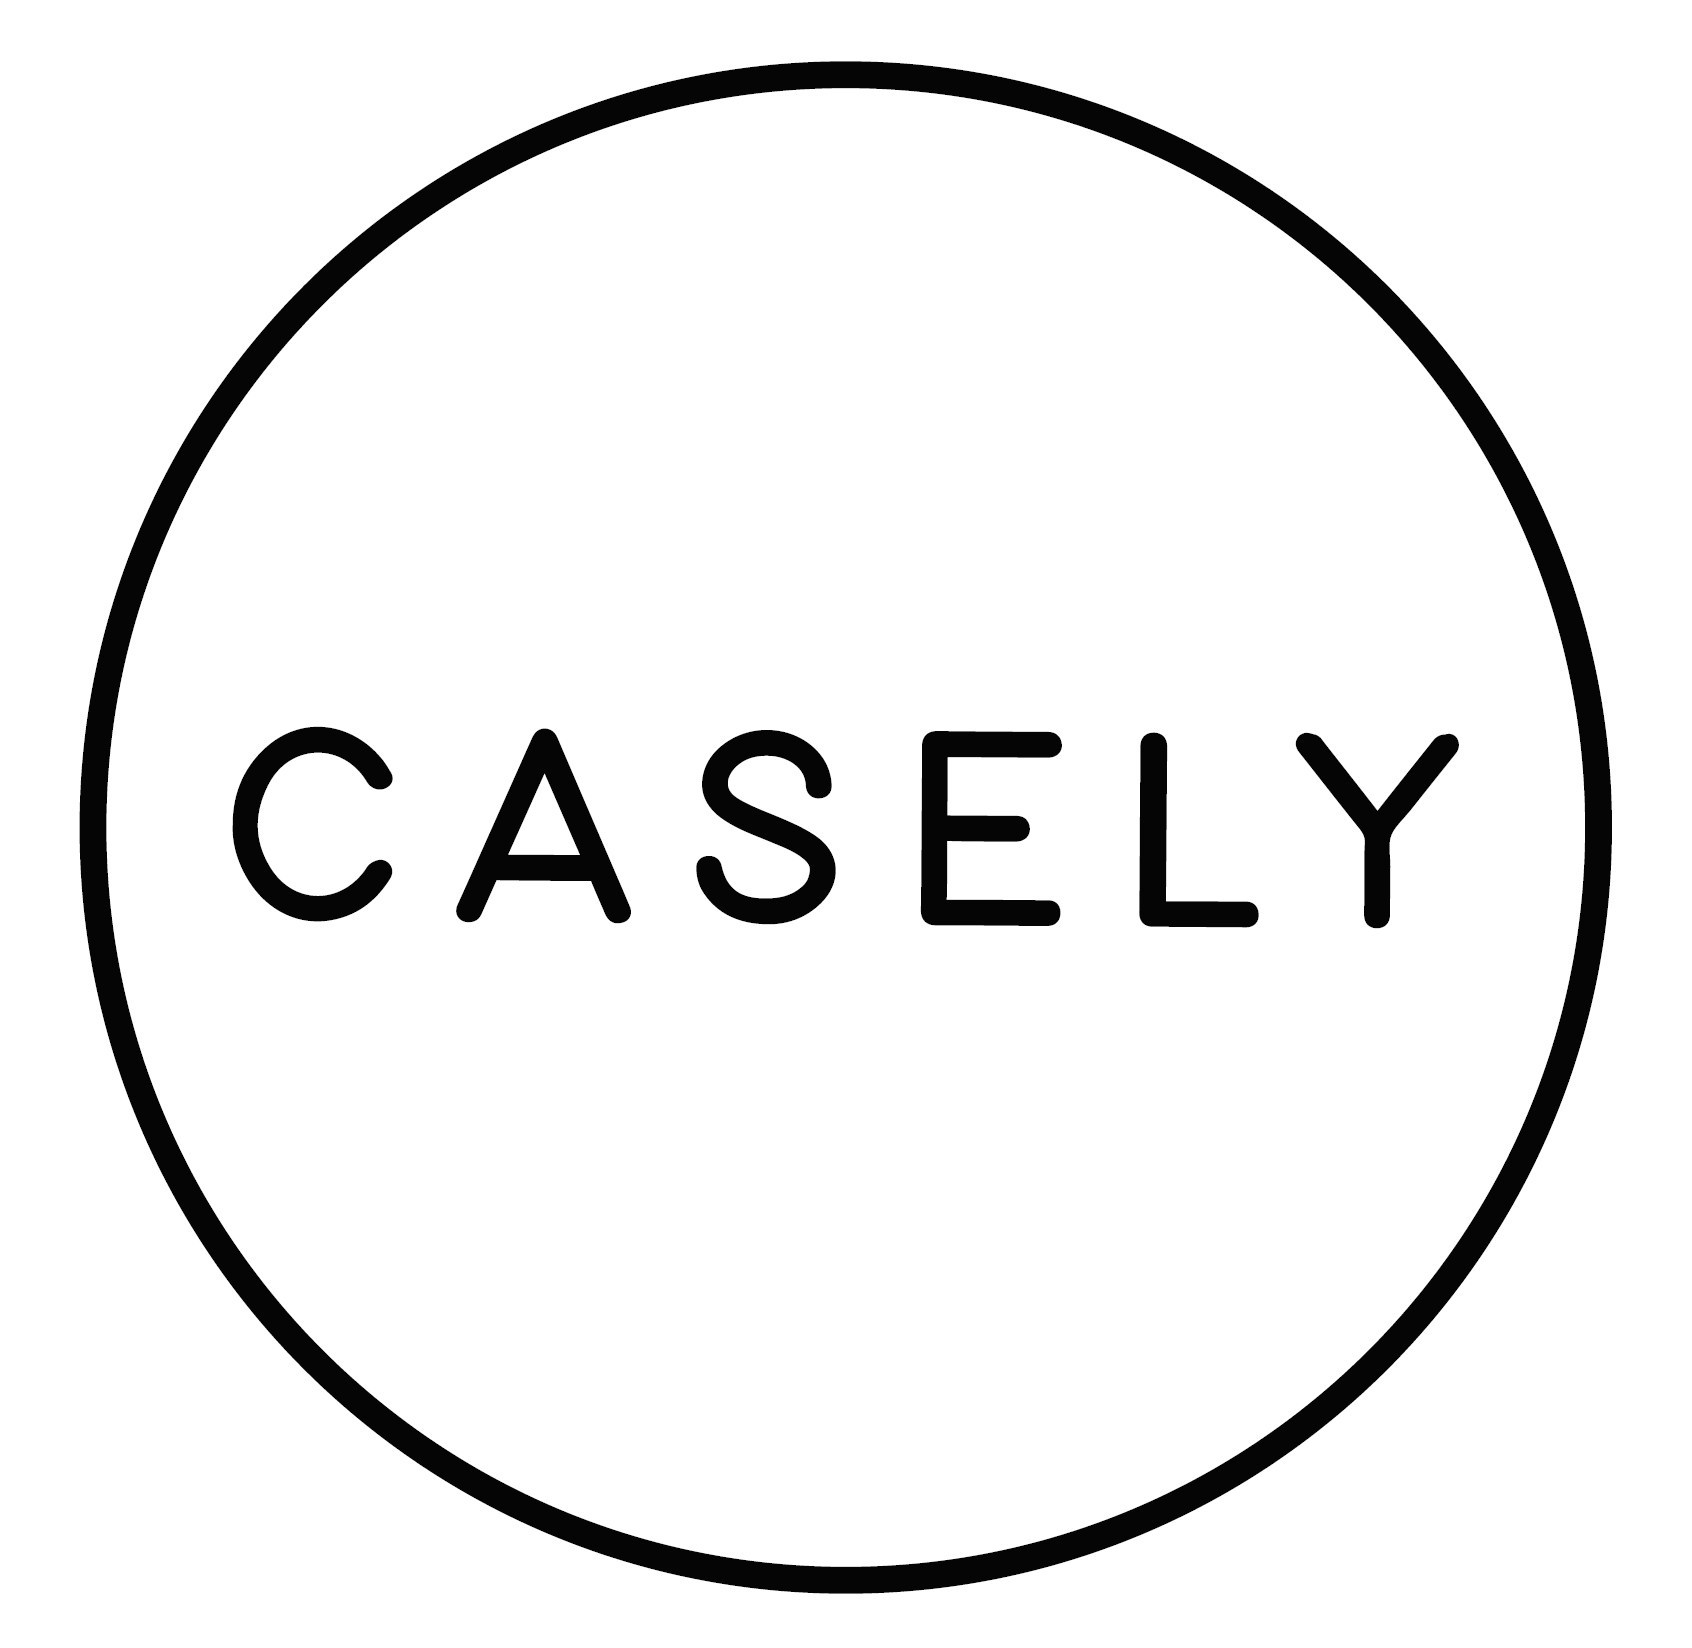 35% Off With Casely Promo Code